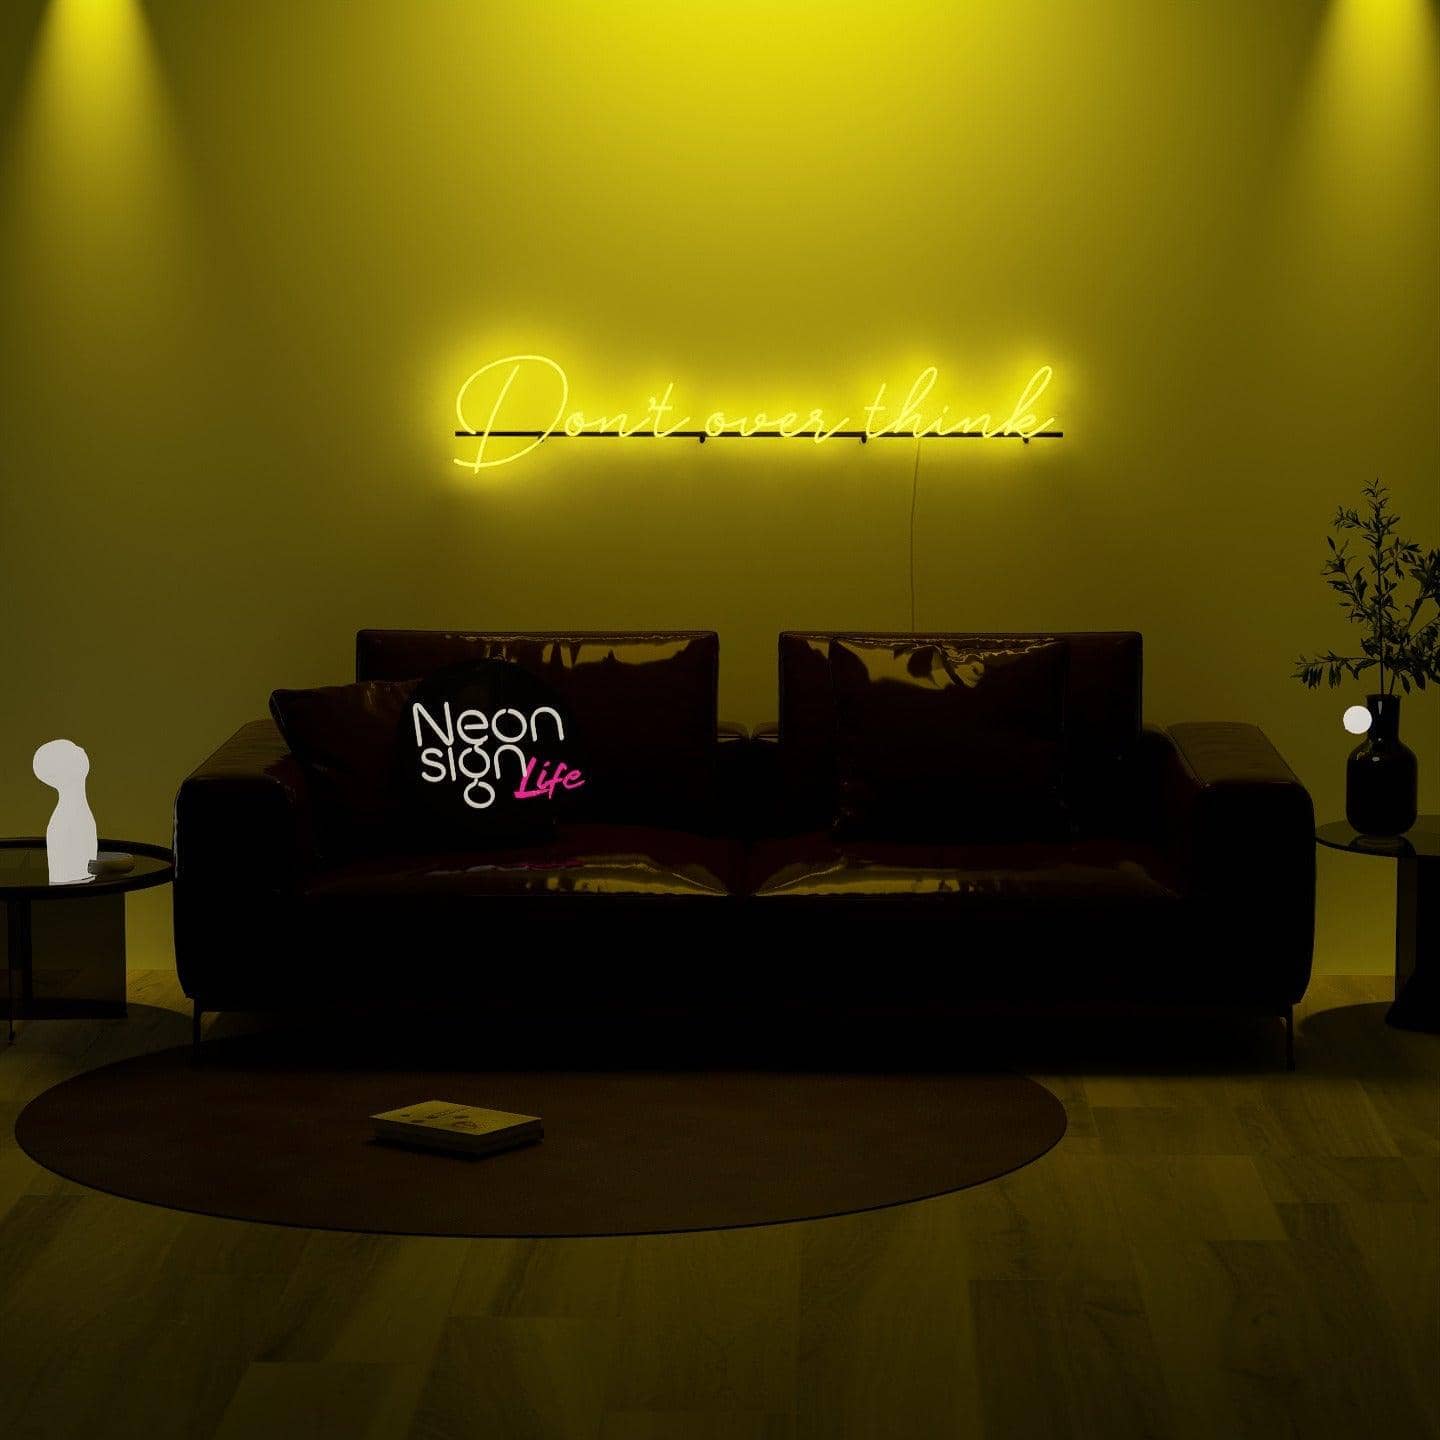 golden-neon-lights-illuminated-in-the-dark-and-hung-on-the-wall-for-display-don't-over-think